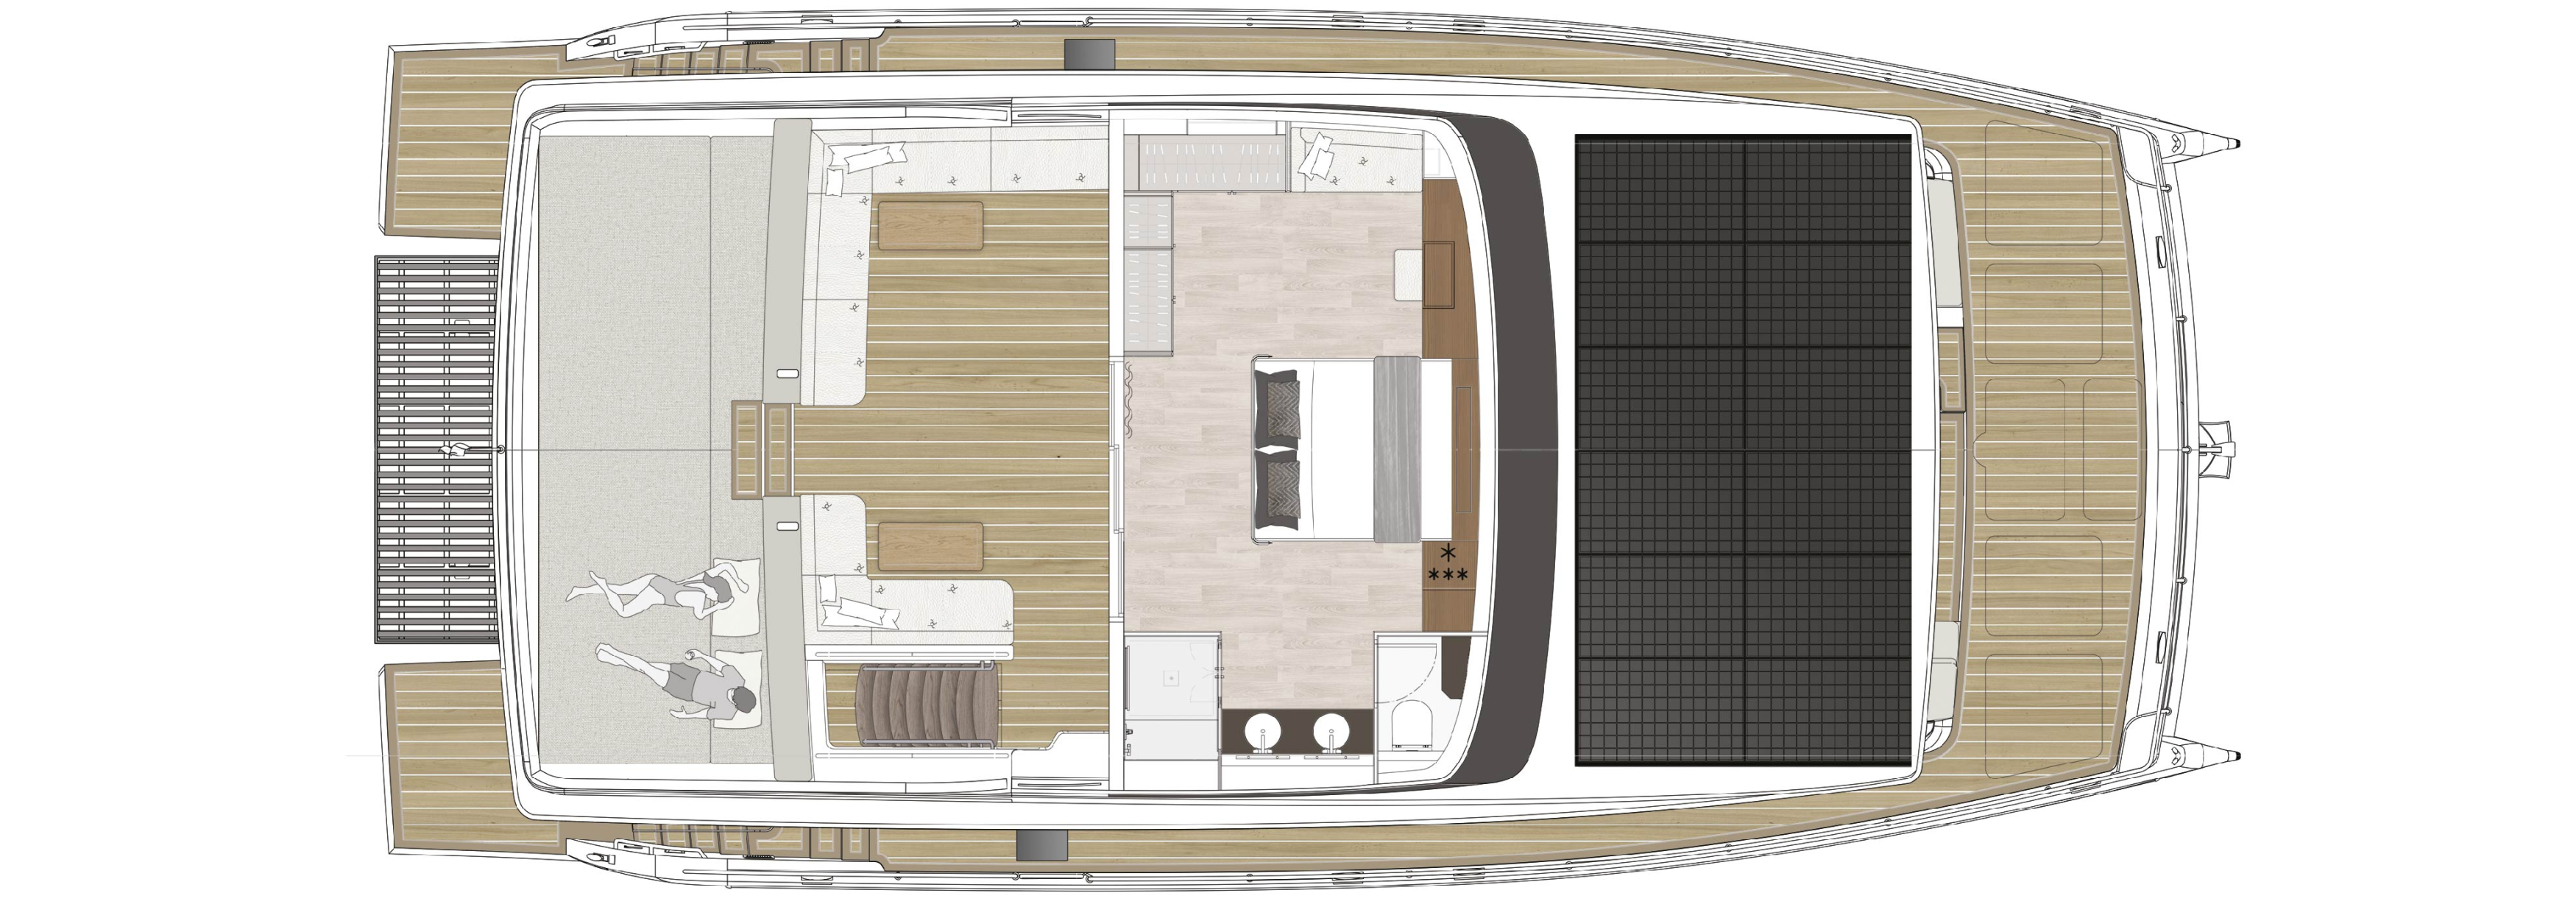 Yacht owners suite plan